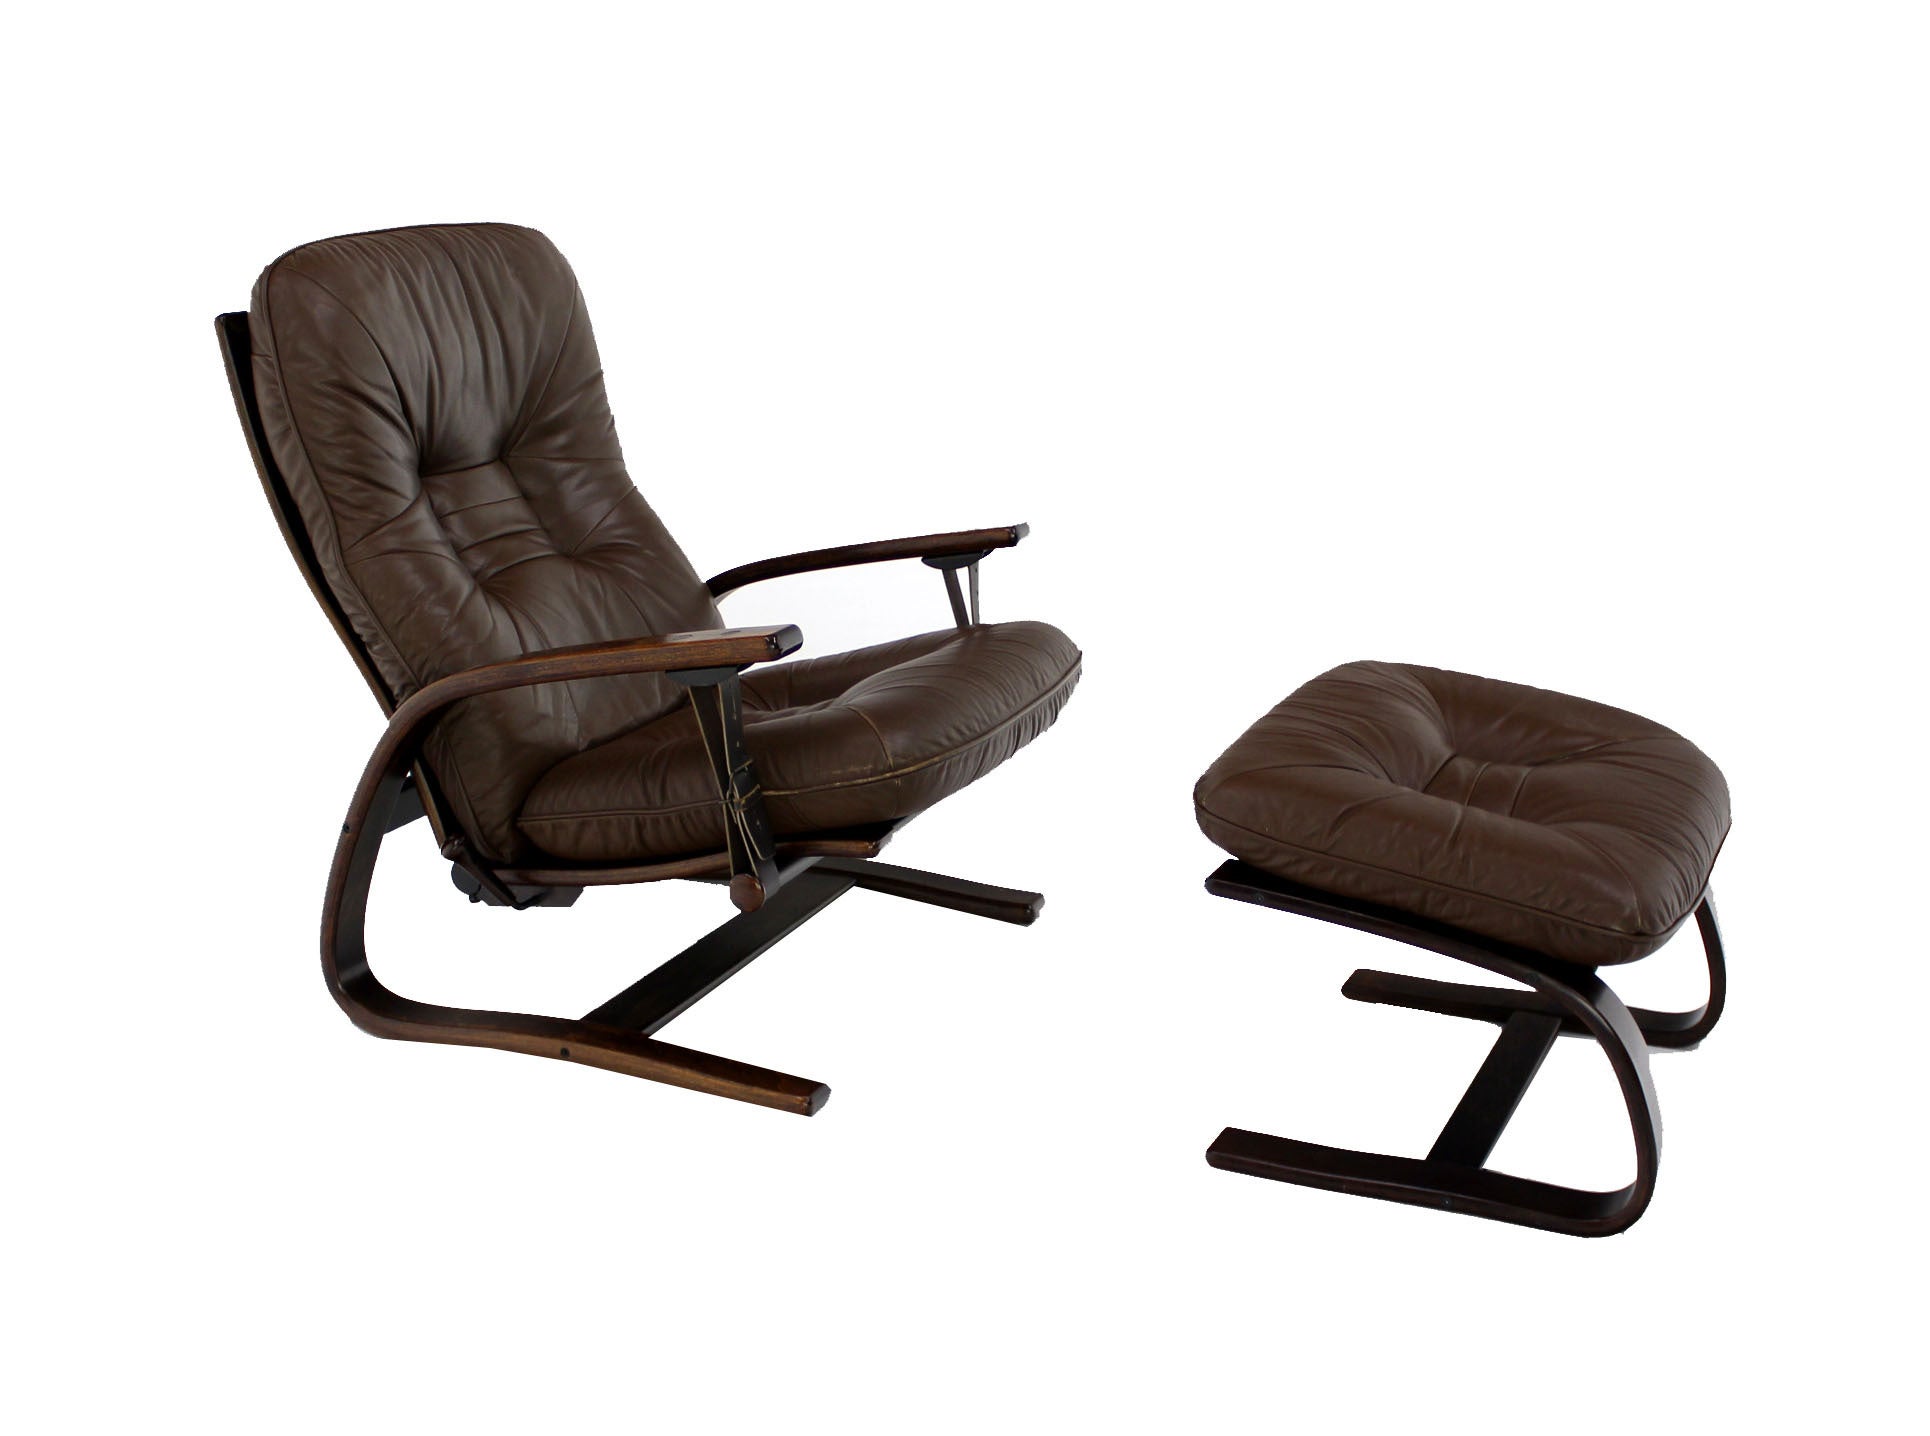 Danish Mid Century Modern Leather Recliner Lounge Chair